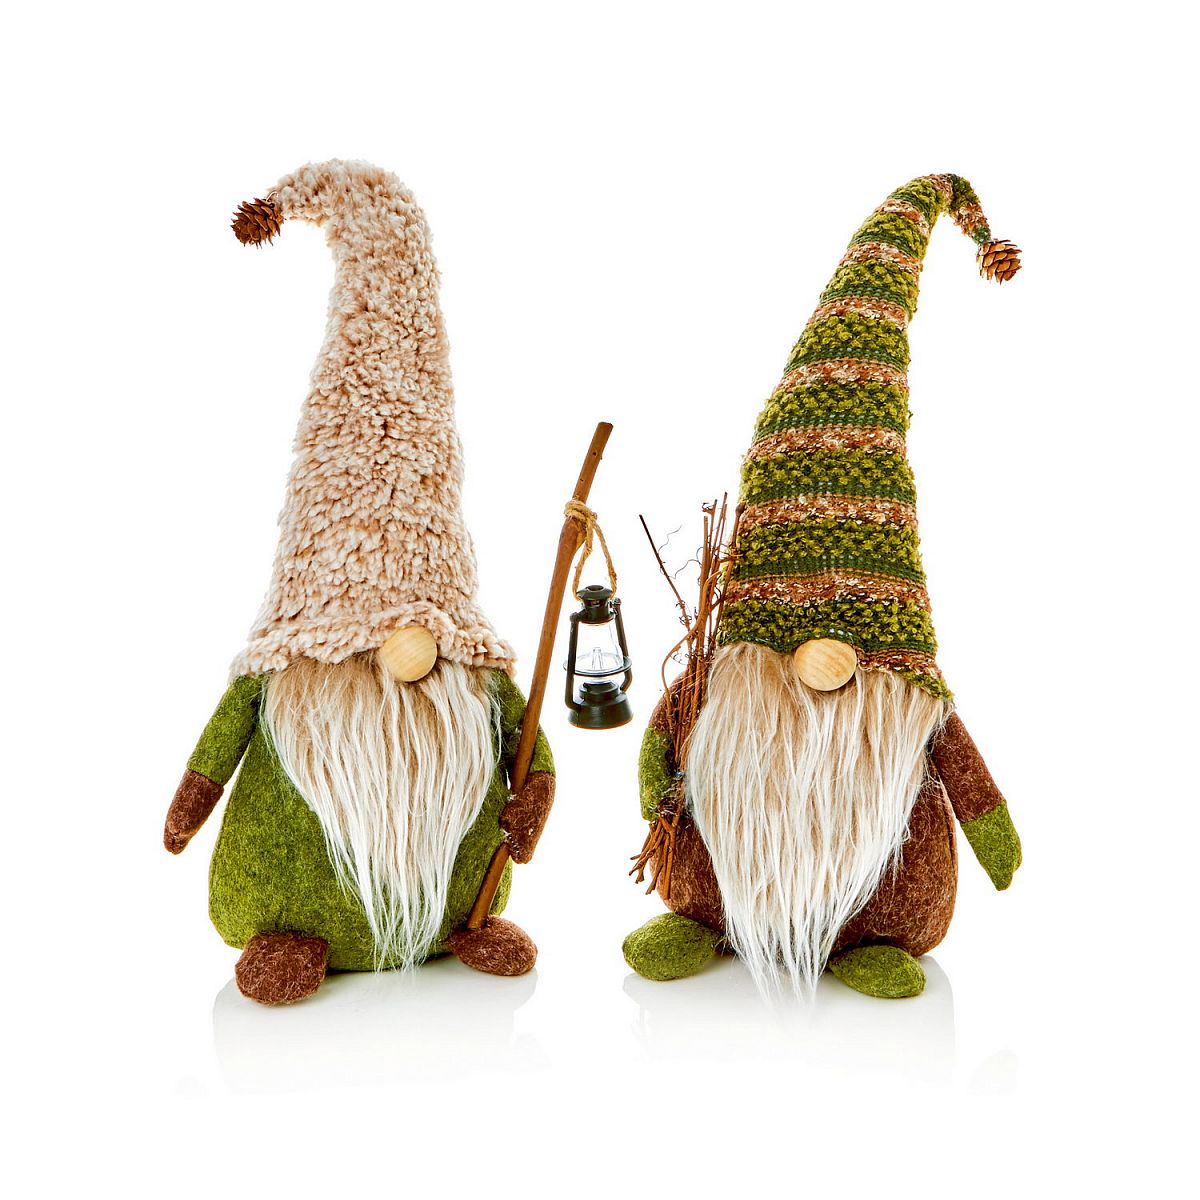 Christmas Rustic Gnomes with Lantern